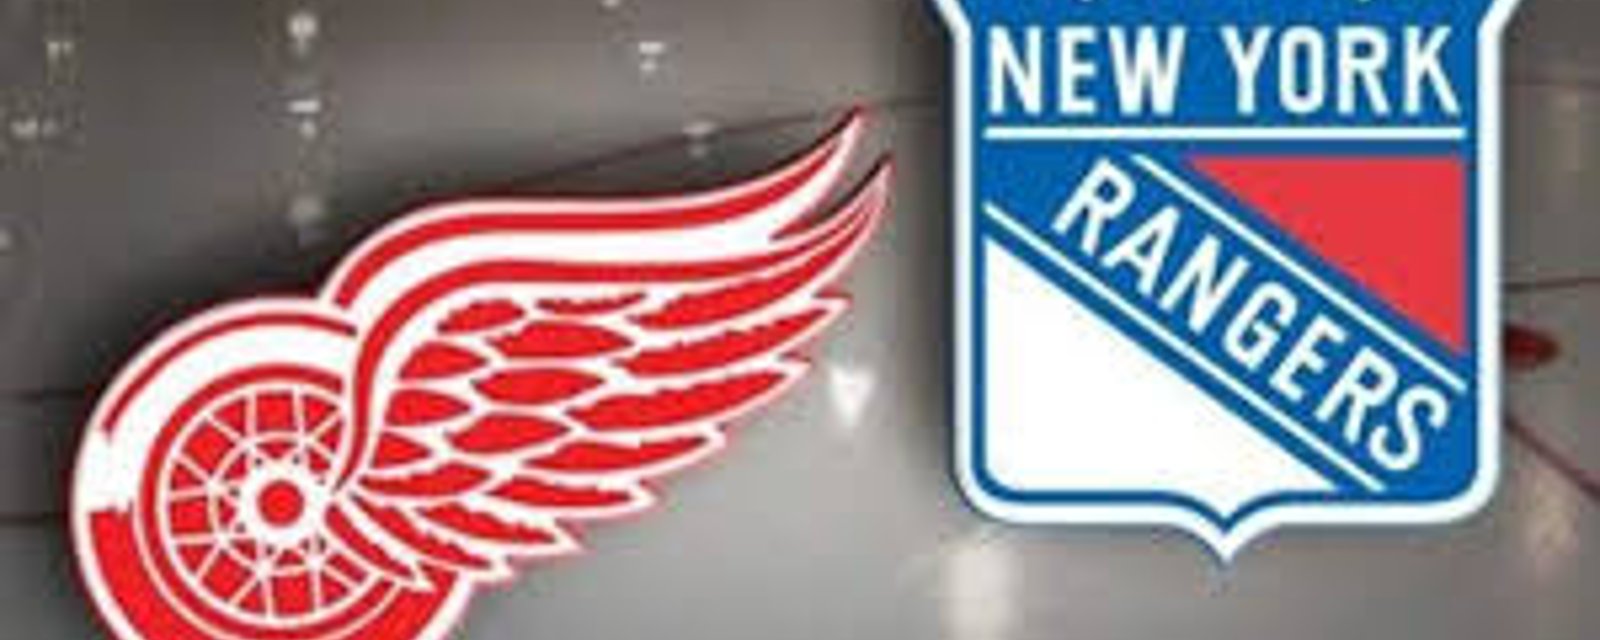 Transaction Rangers / Red Wings!